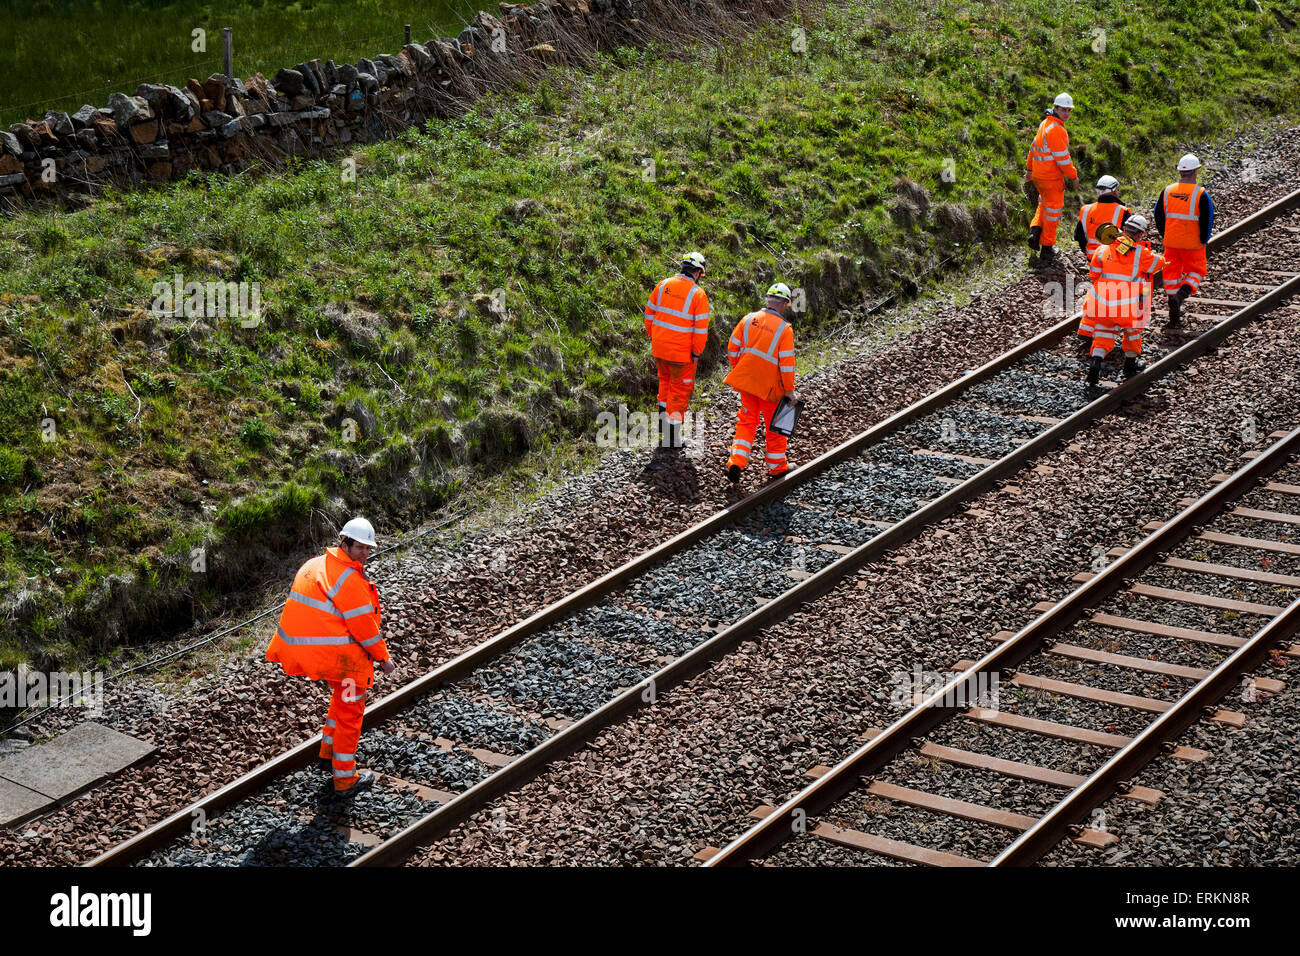 Network Rail Engineers & rail engineer on Settle Carlisle Line, Health and Safety for Men at Work. Tebay Cumbria working on rail track maintenance. Inspectors, Safety engineers, employees, rail workers, workmen, renewing railway lines and Infrastructure surveyors inspecting & measuring the transport freight line track at the summit of Ais Gill. The railway's summit at 1,169 feet (356 metres) is north of Garsdale is the highest mainline in England, and carries heavily loaded main line freight trains. Stock Photo